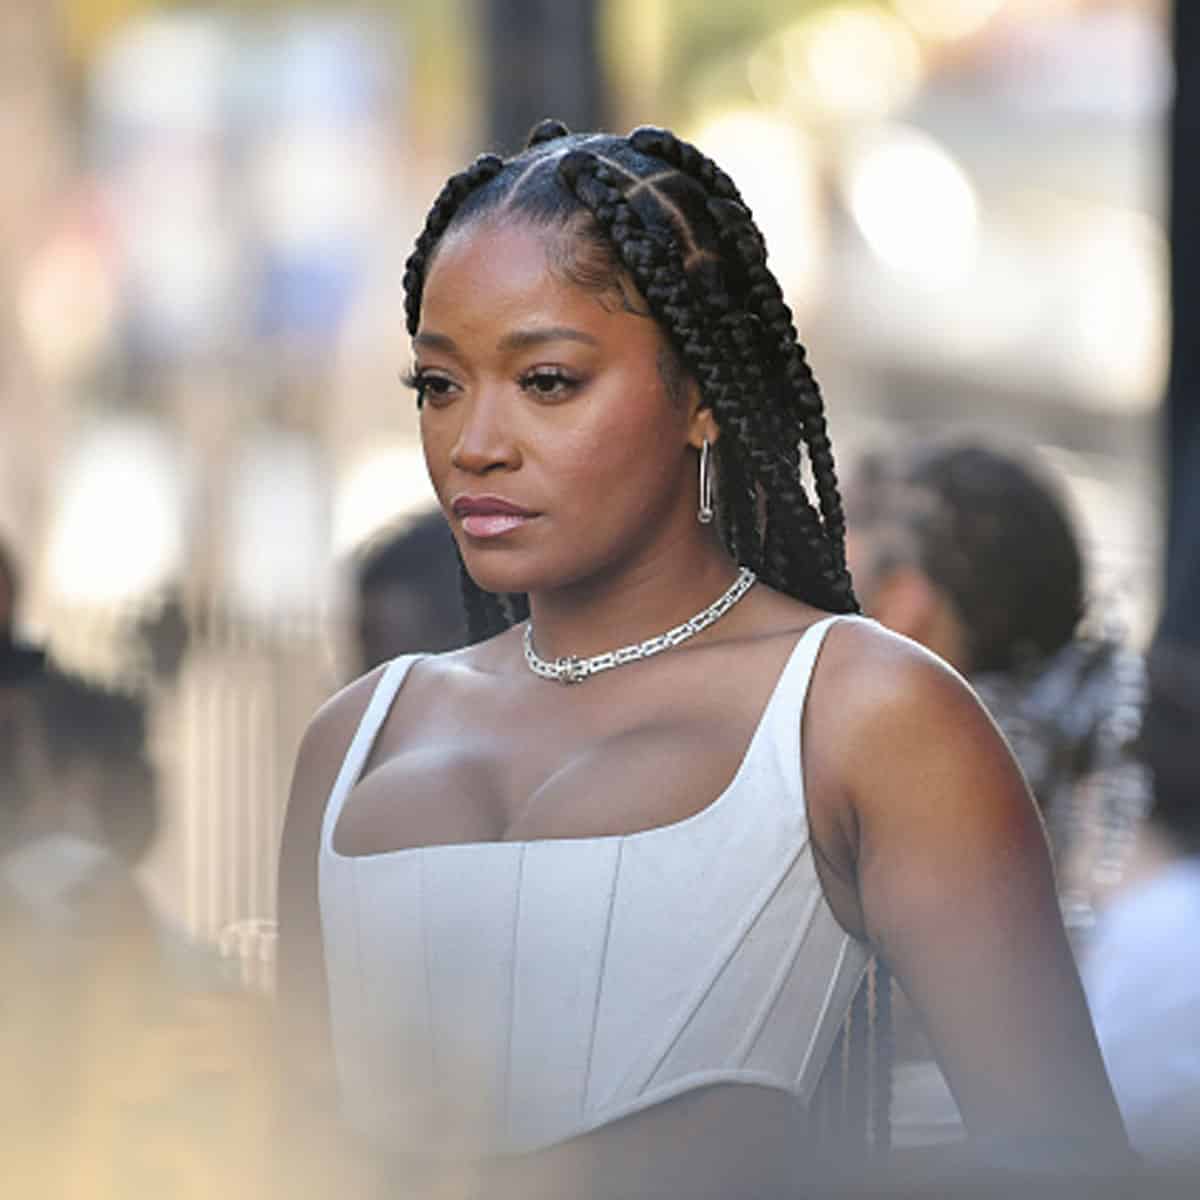 Keke Palmer attends the world premiere of Universal Pictures' "NOPE" at TCL Chinese Theatre